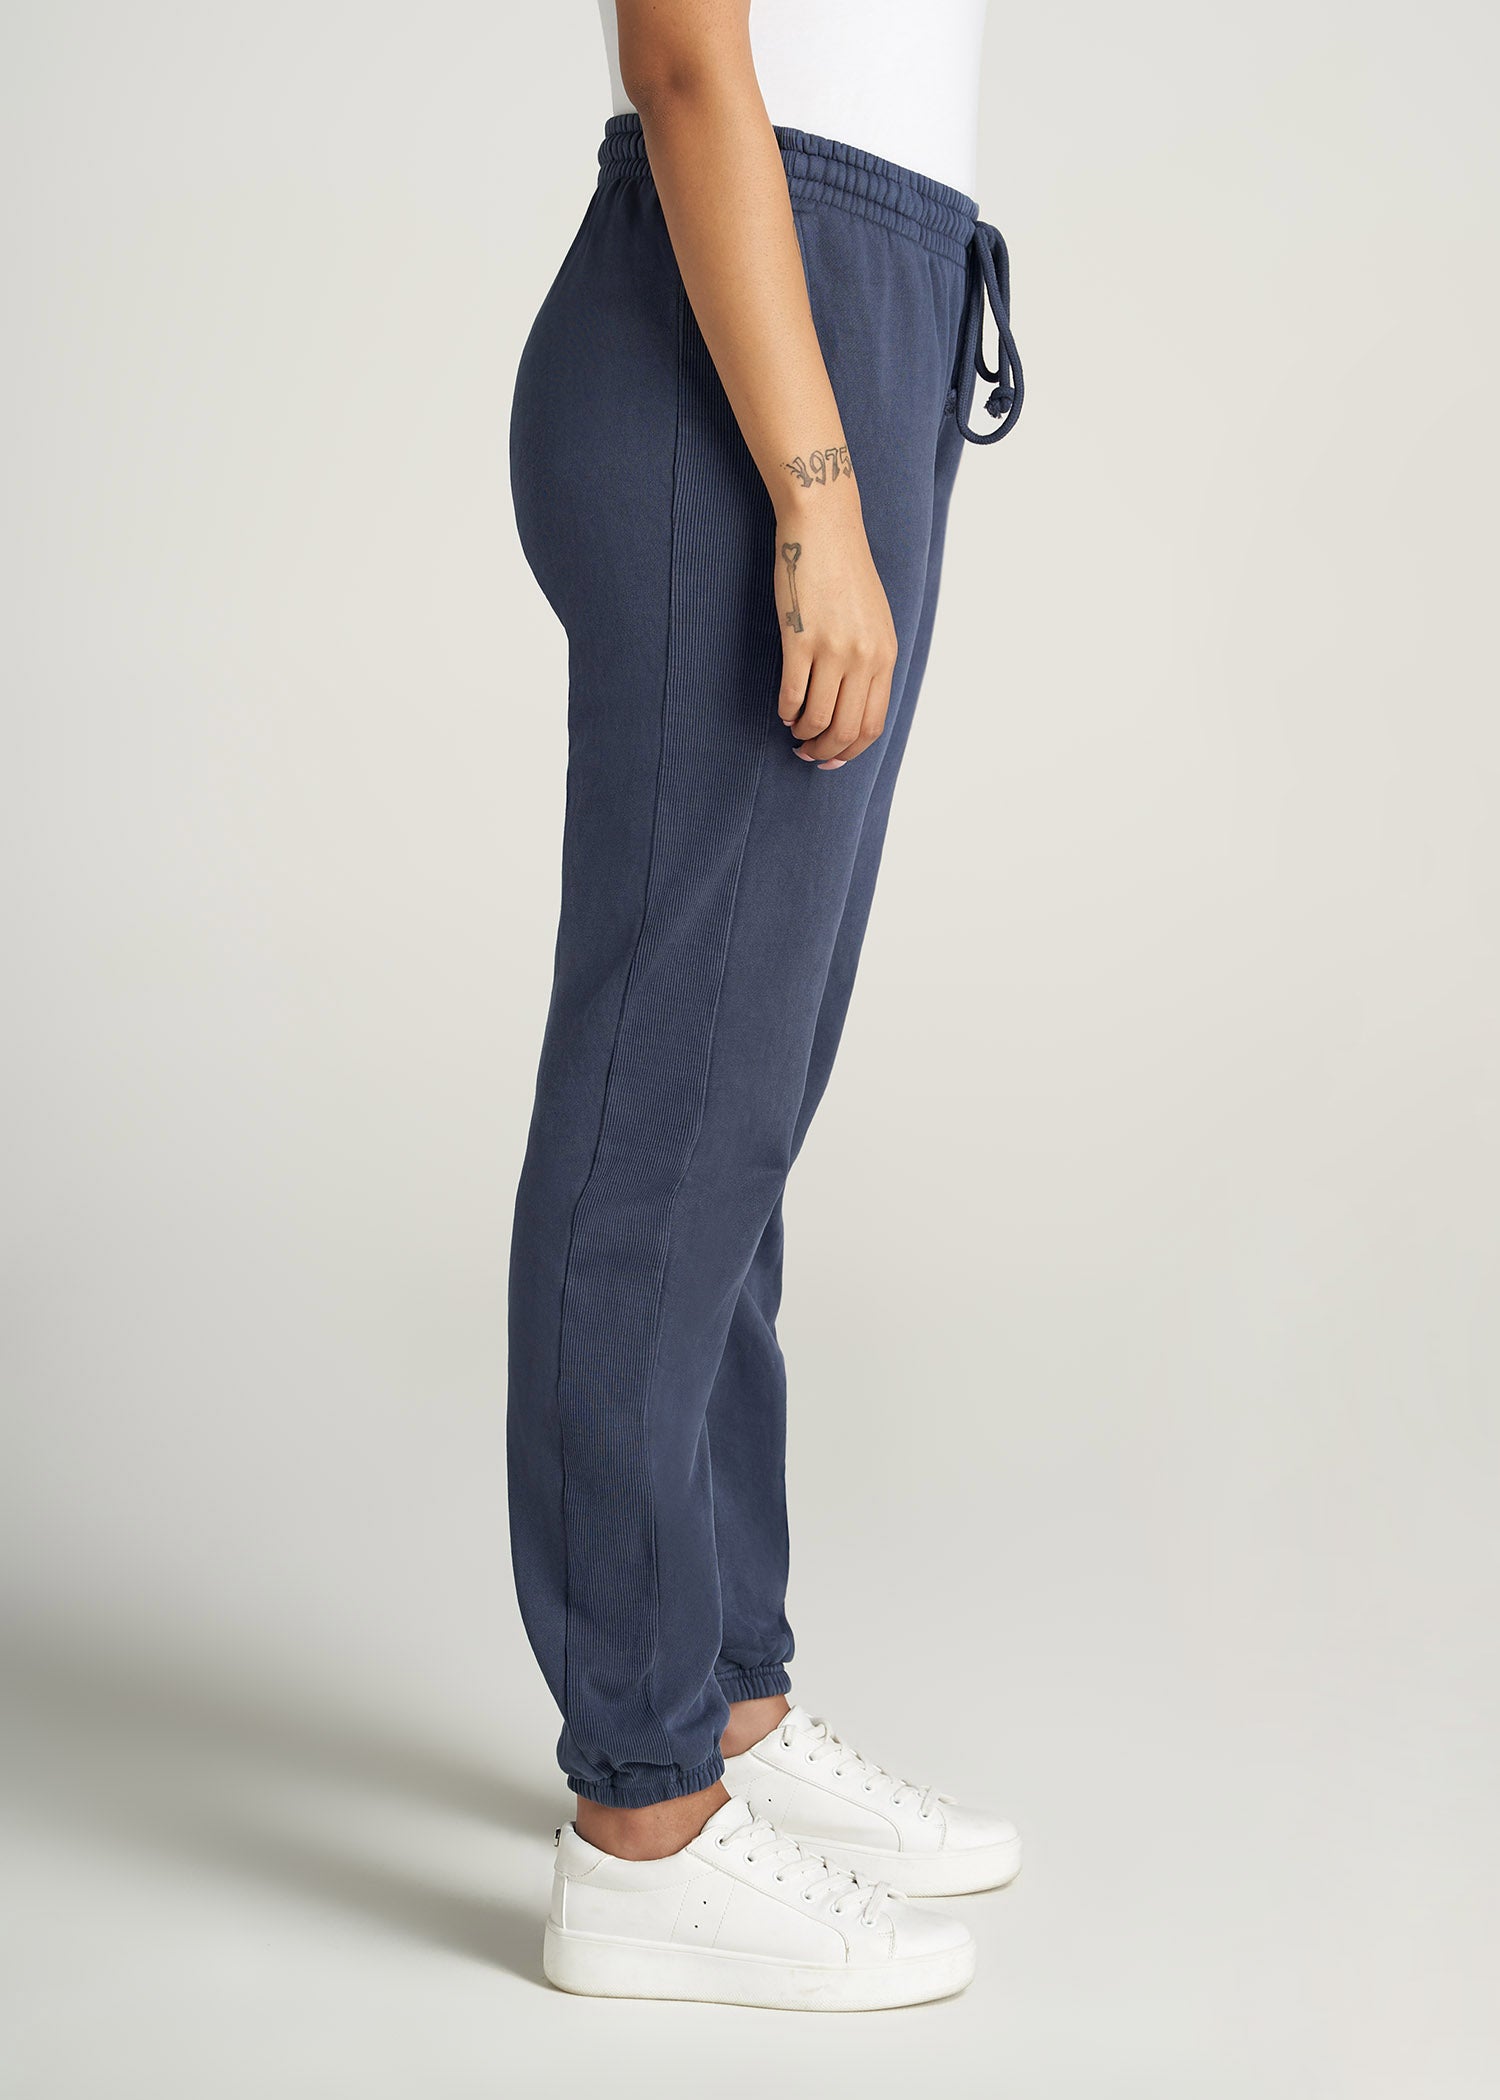 The Wearever Collection for Tall Women – American Tall